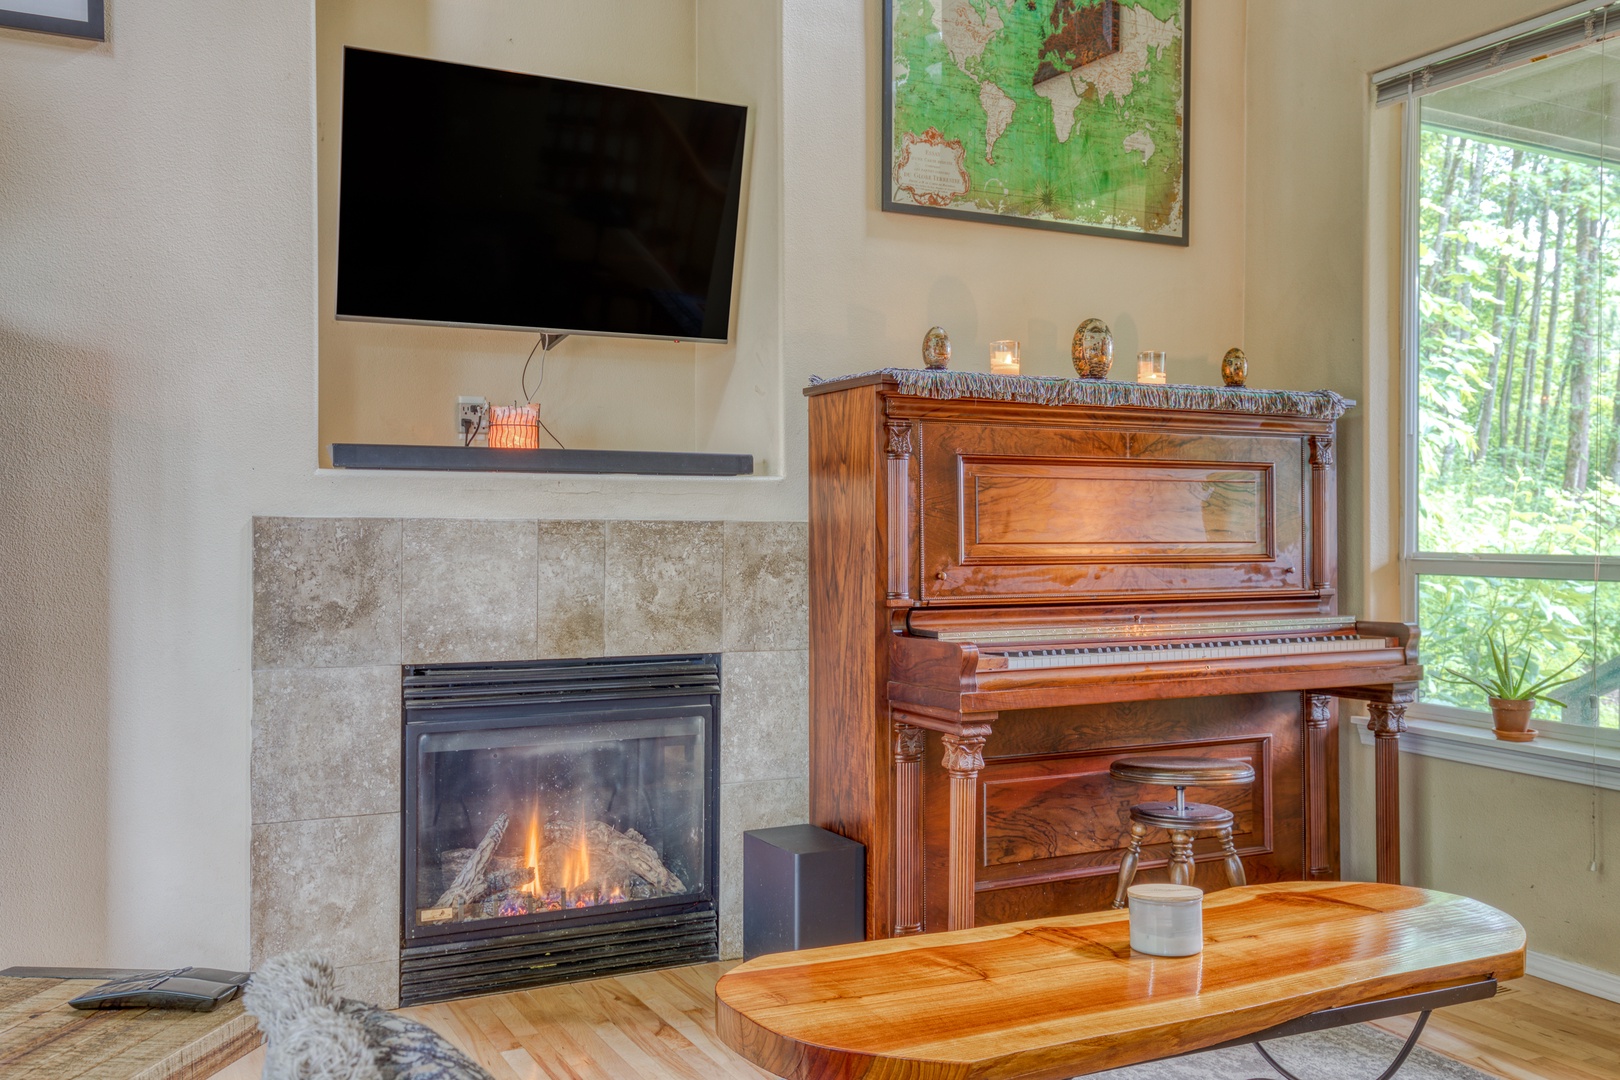 Clackamas Vacation Rentals, Duck Crossing - Equipped with a flatscreen TV, gas fireplace, and piano